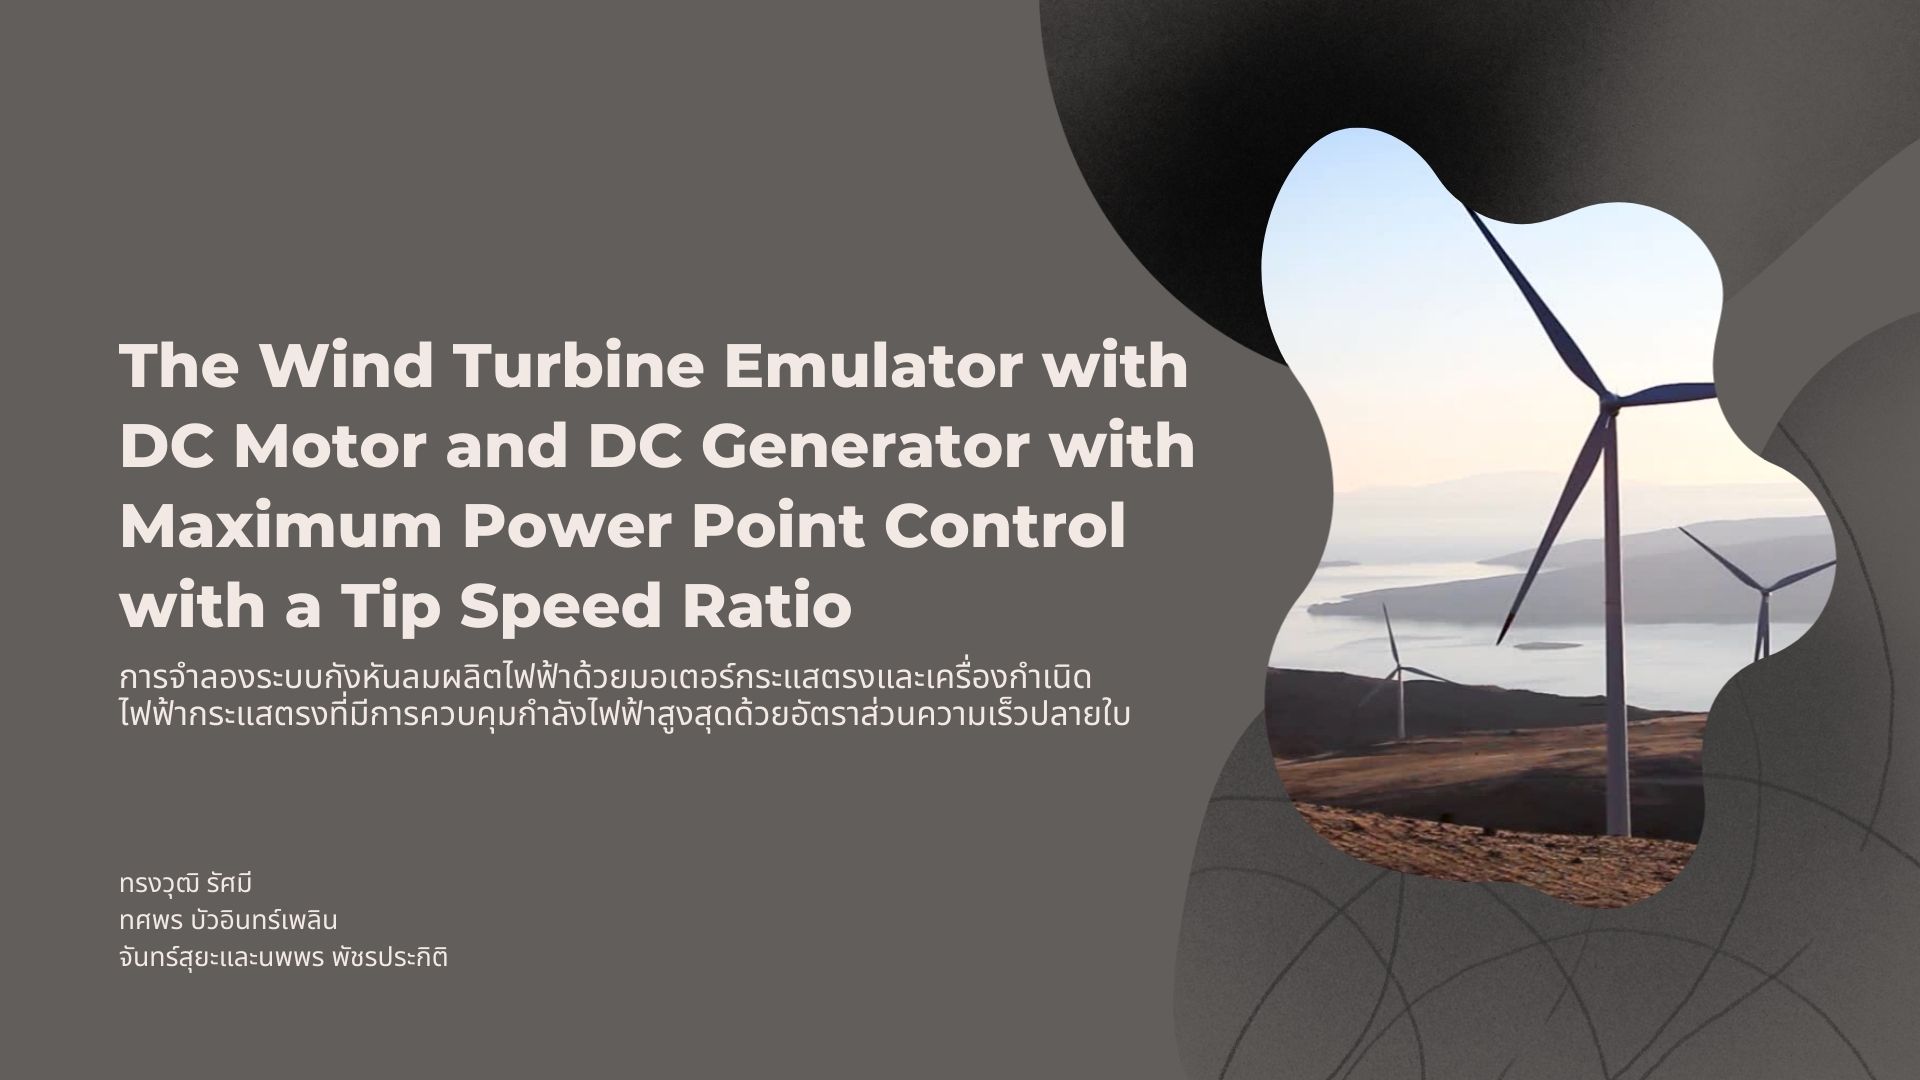 The Wind Turbine Emulator with DC Motor and DC Generator with Maximum Power Point Control with a Tip Speed Ratio